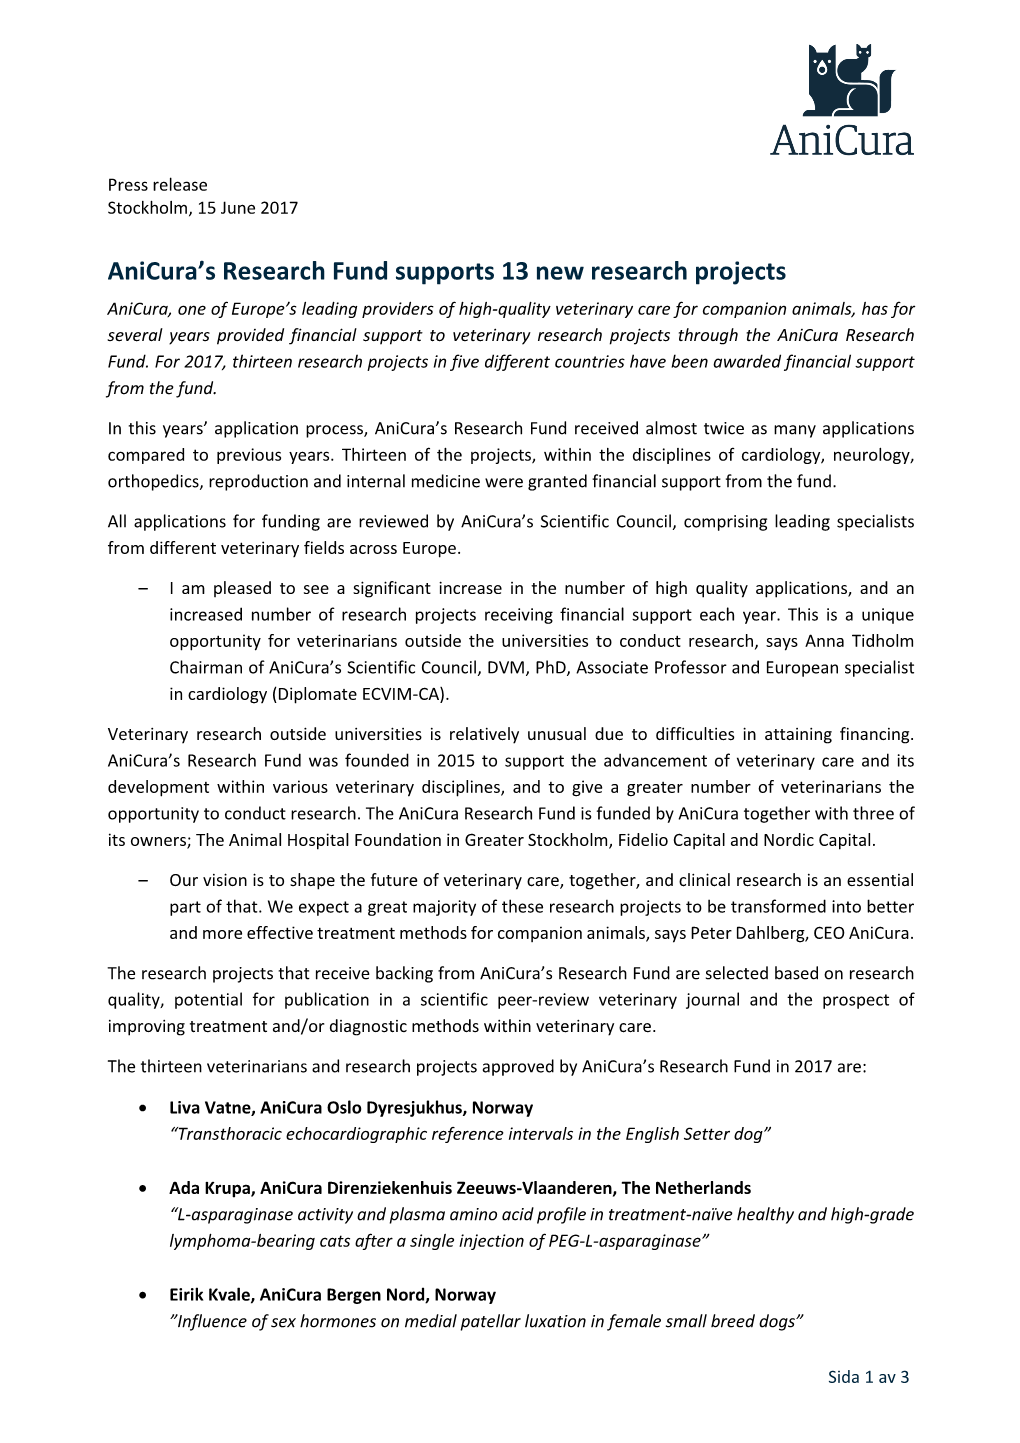 Anicura's Research Fund Supports 13 New Research Projects